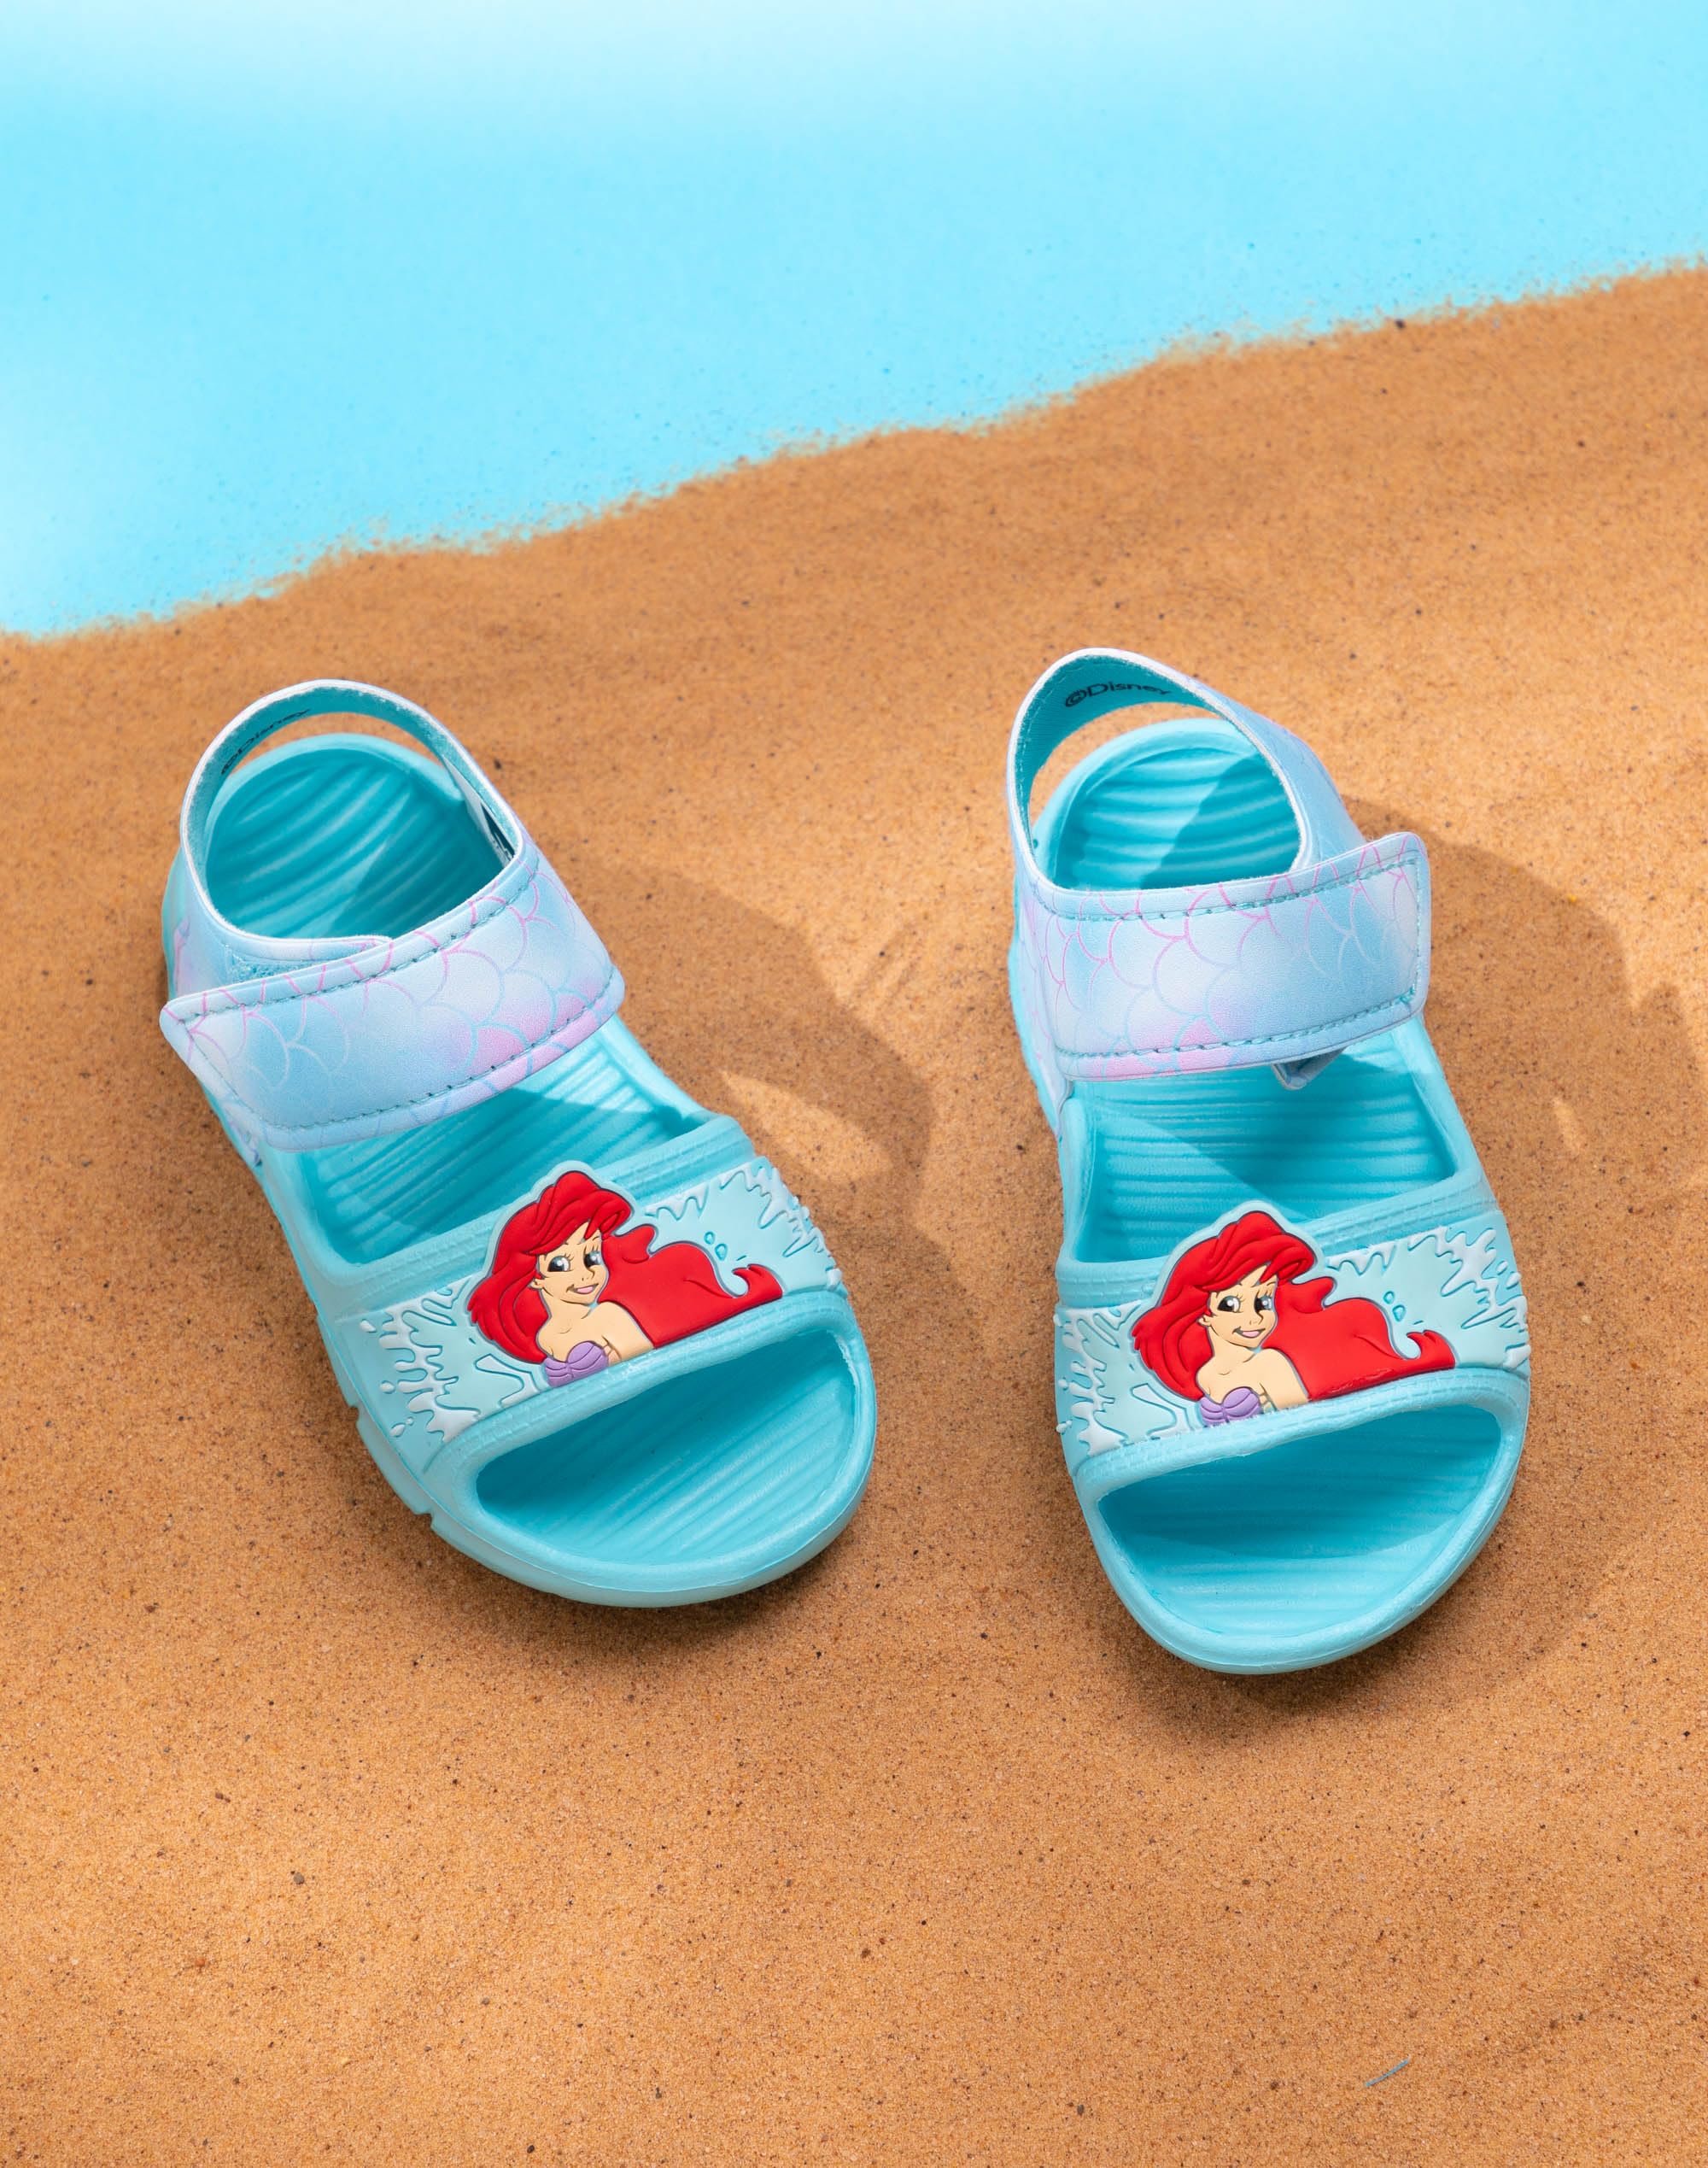 Disney The Little Mermaid Ariel Sandals Girls Toddlers | Kids Blue Sliders with Supportive Strap | Summer Shoes